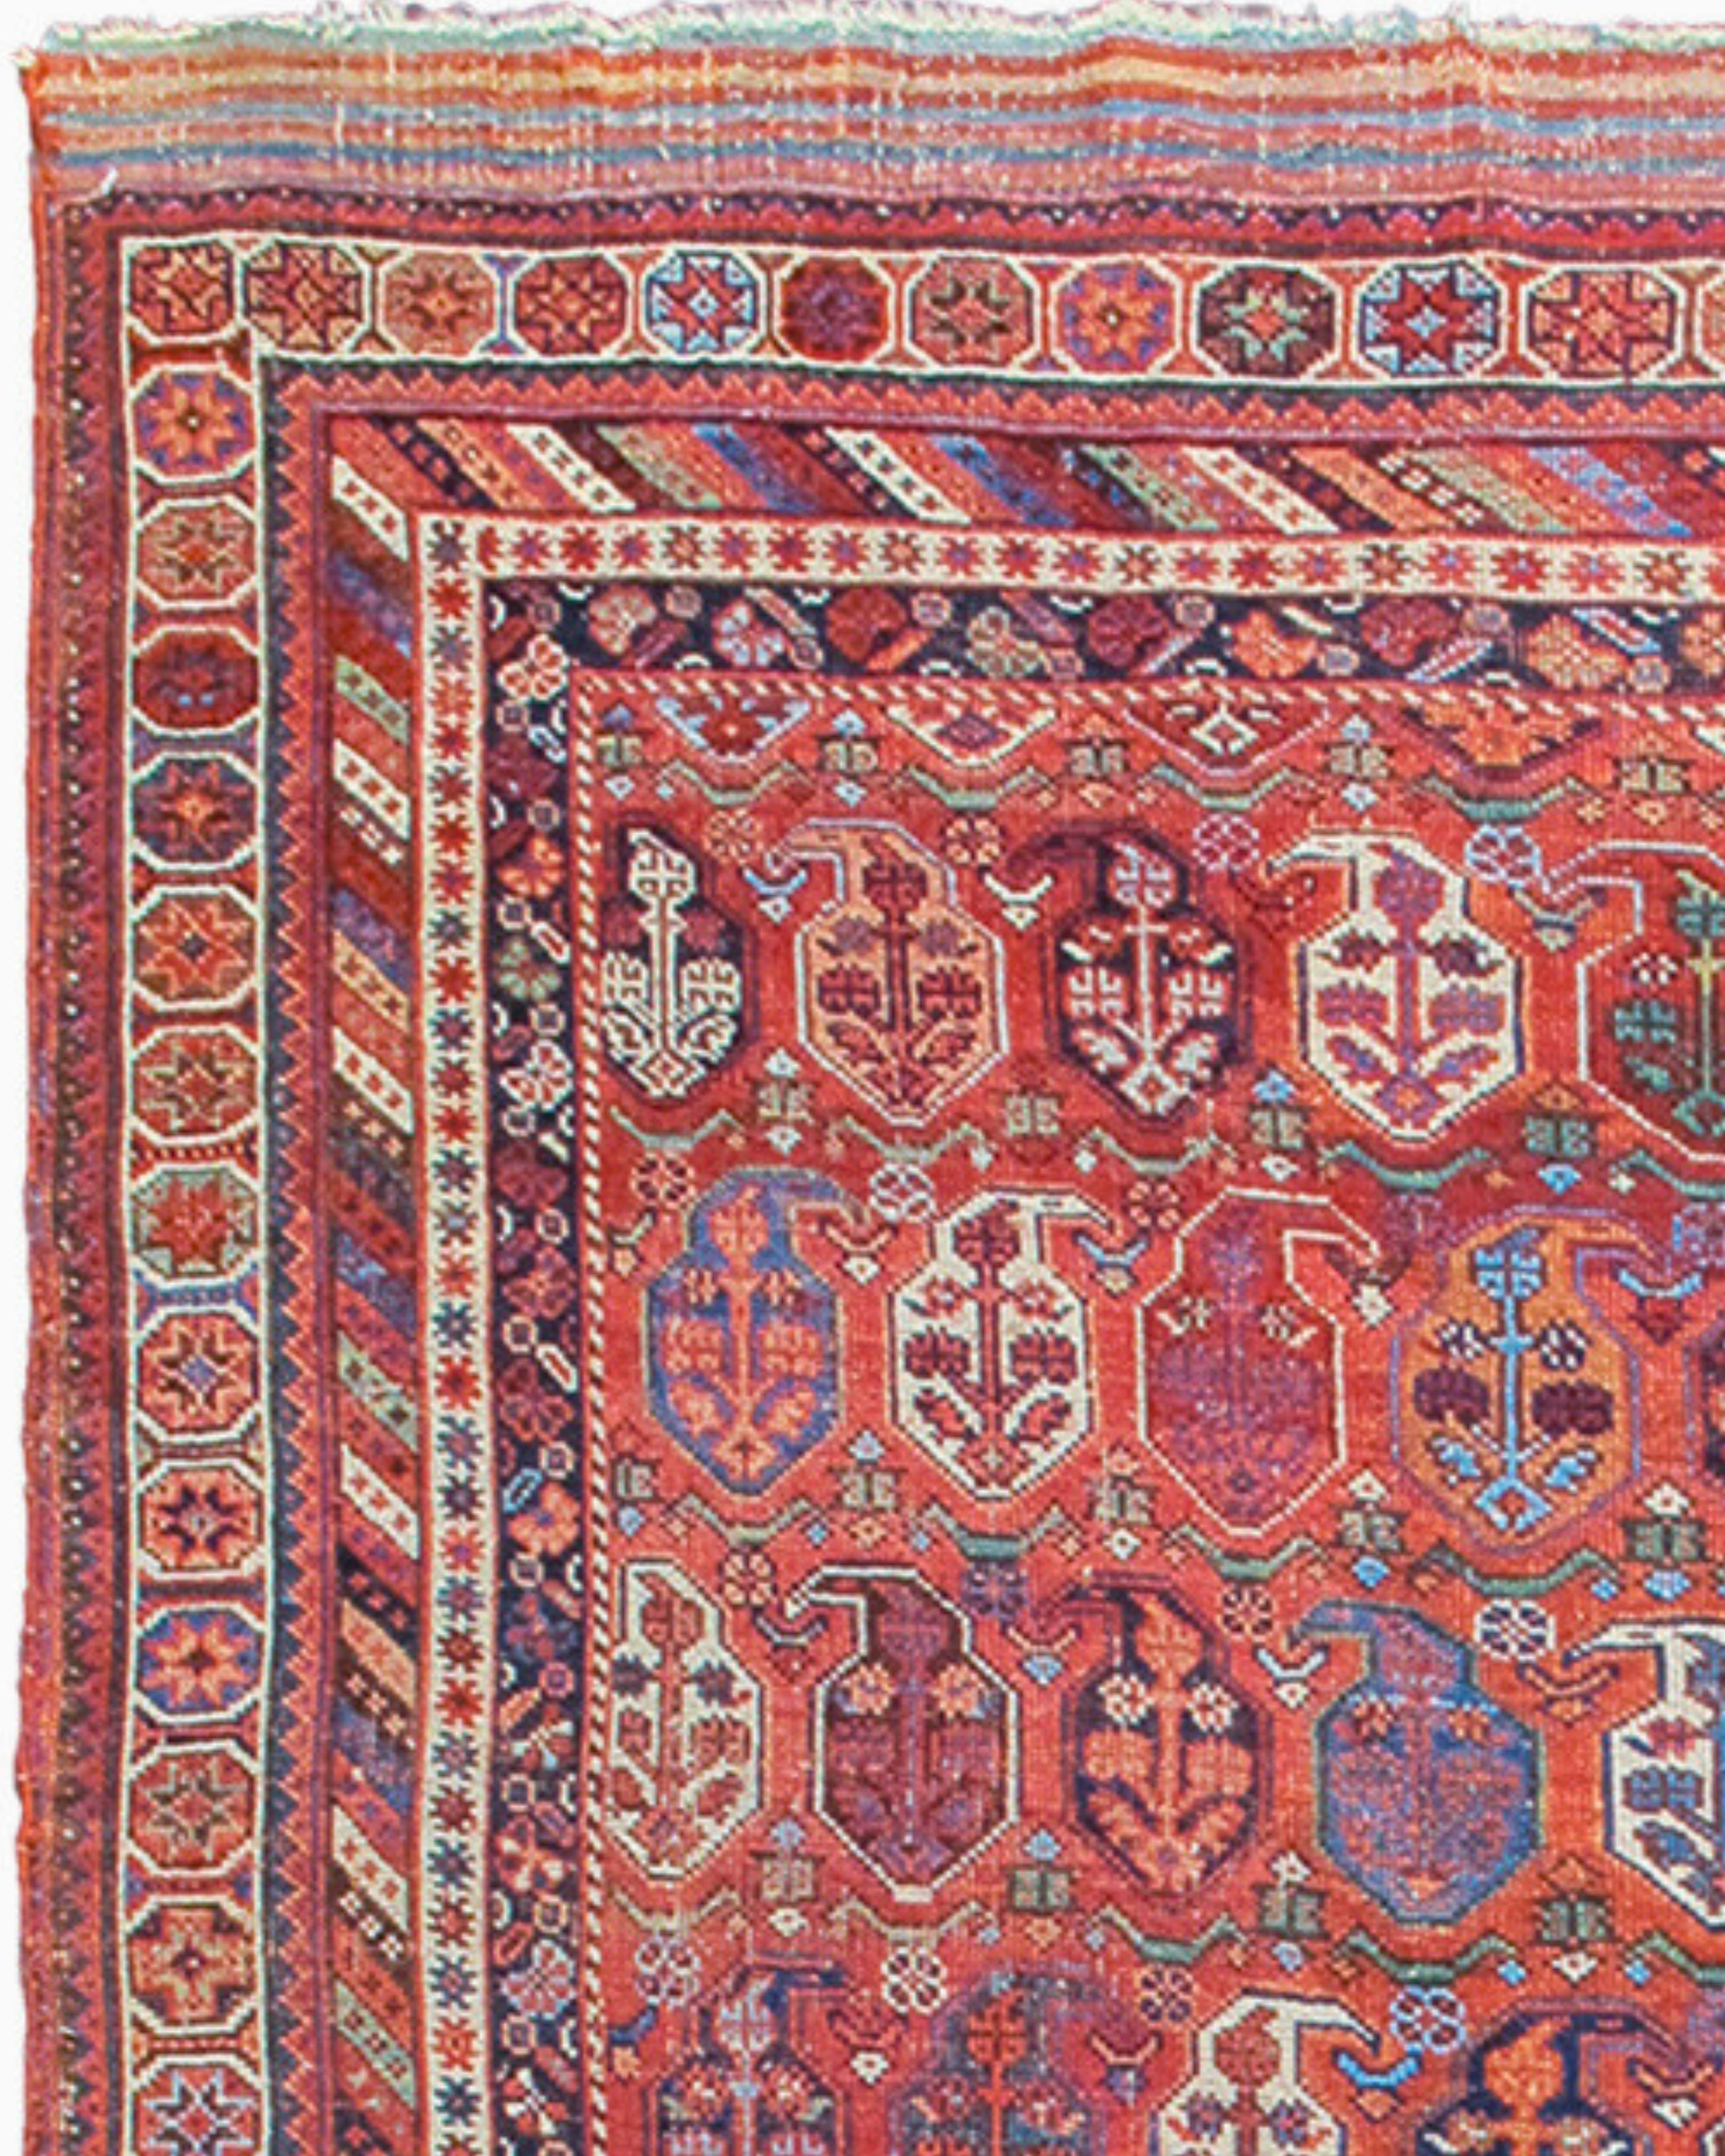 Hand-Woven Antique Persian Afshar Rug, Late 19th Century For Sale